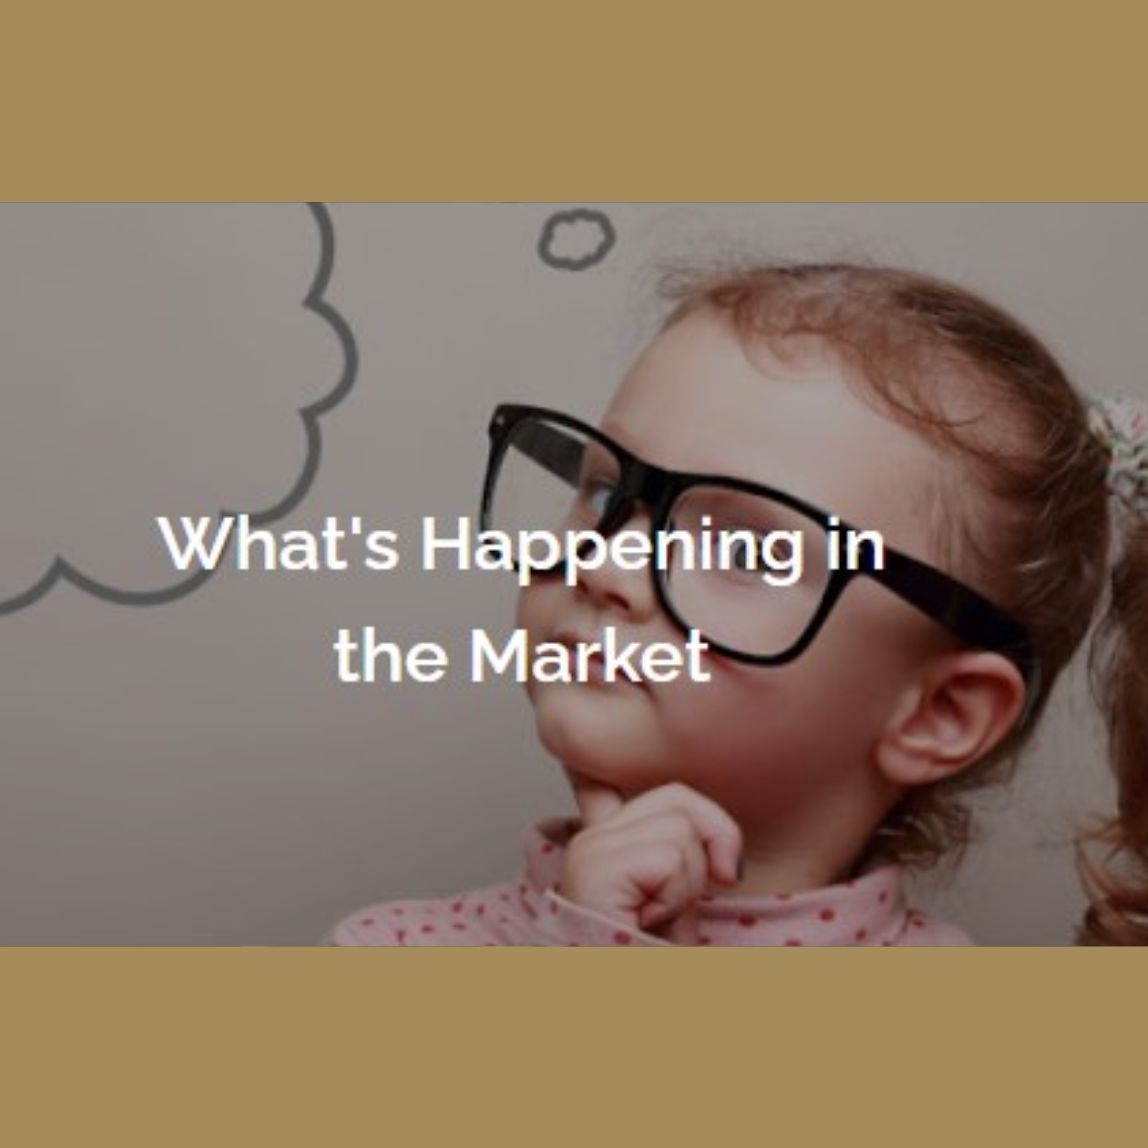 What's Happening in the Market